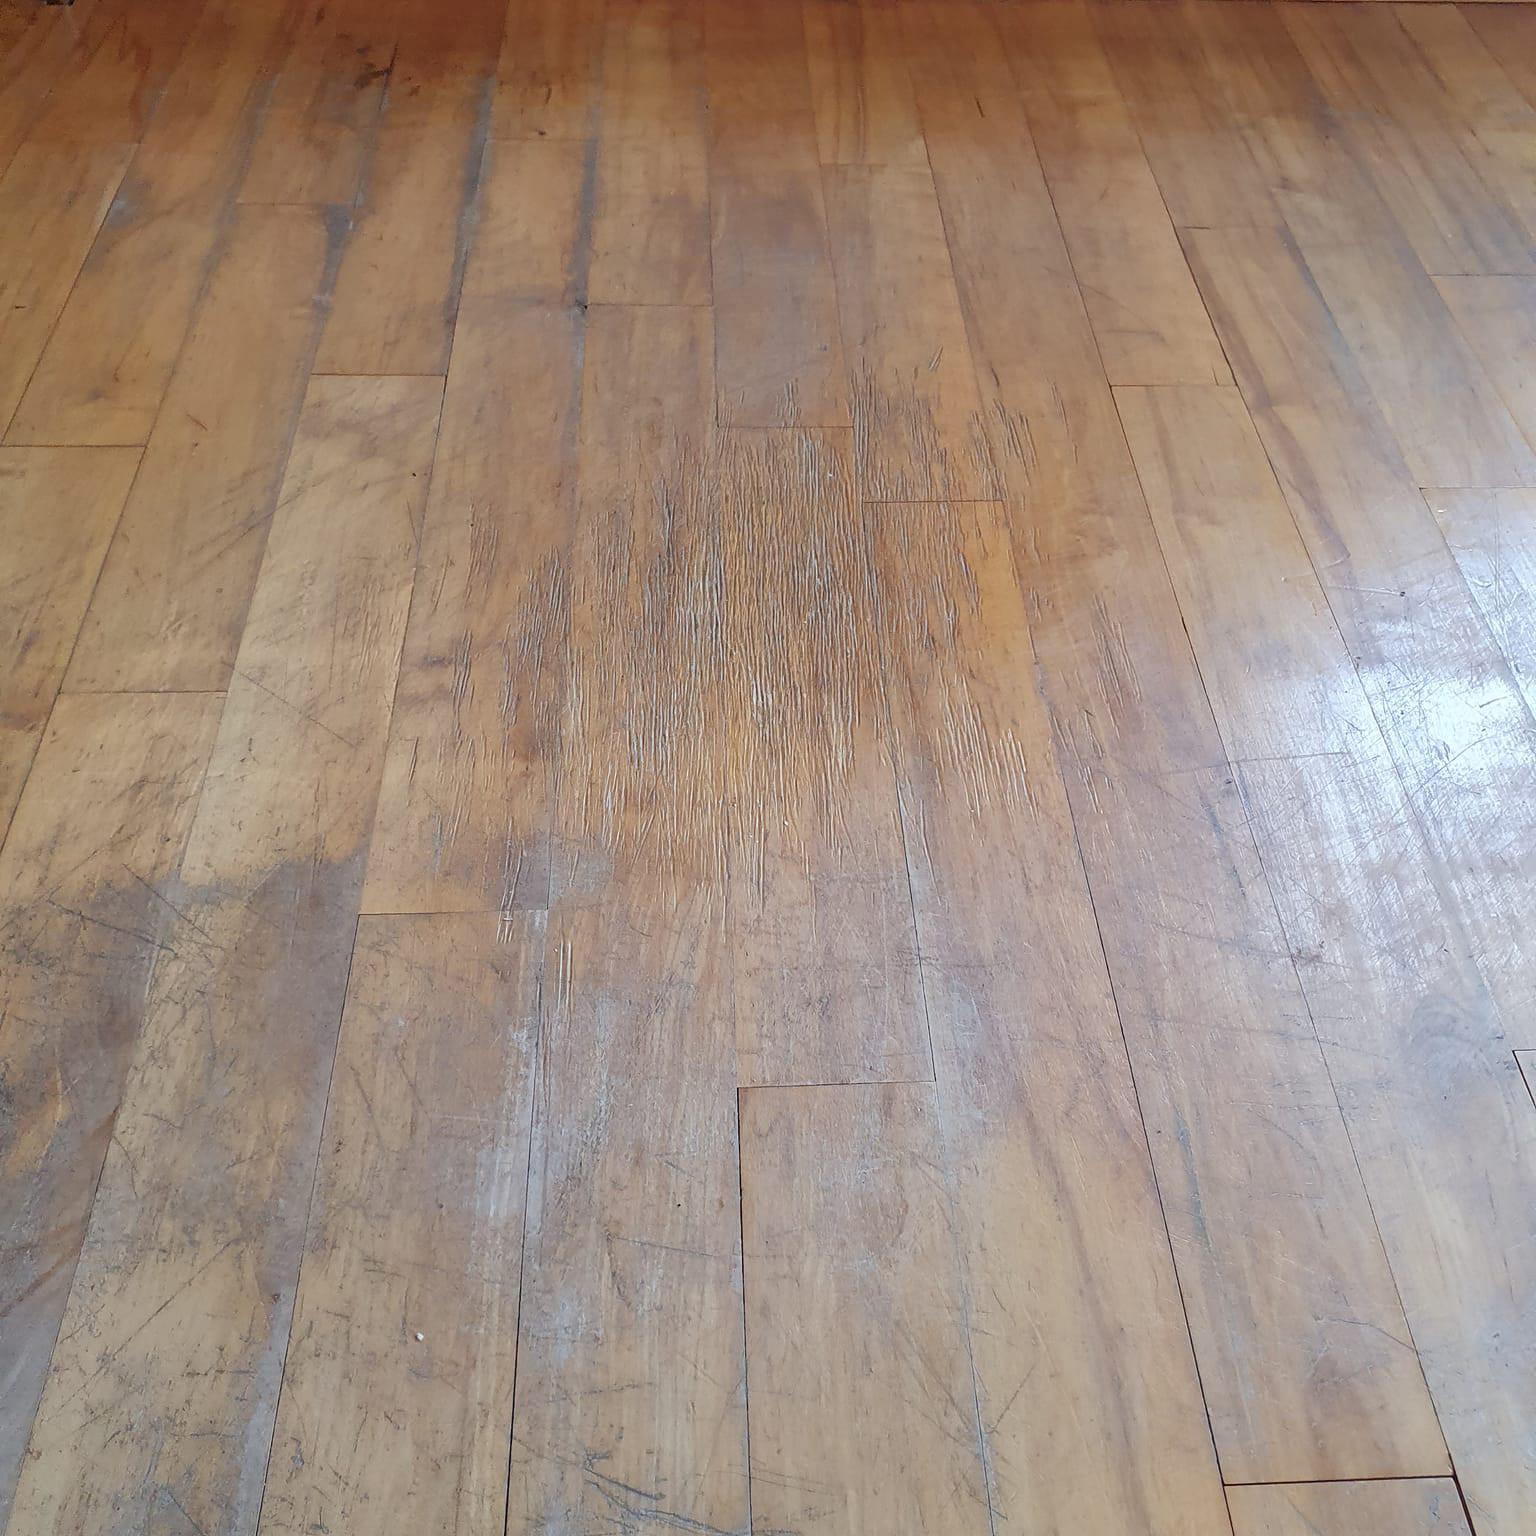 Scratched dull solid wood flooring